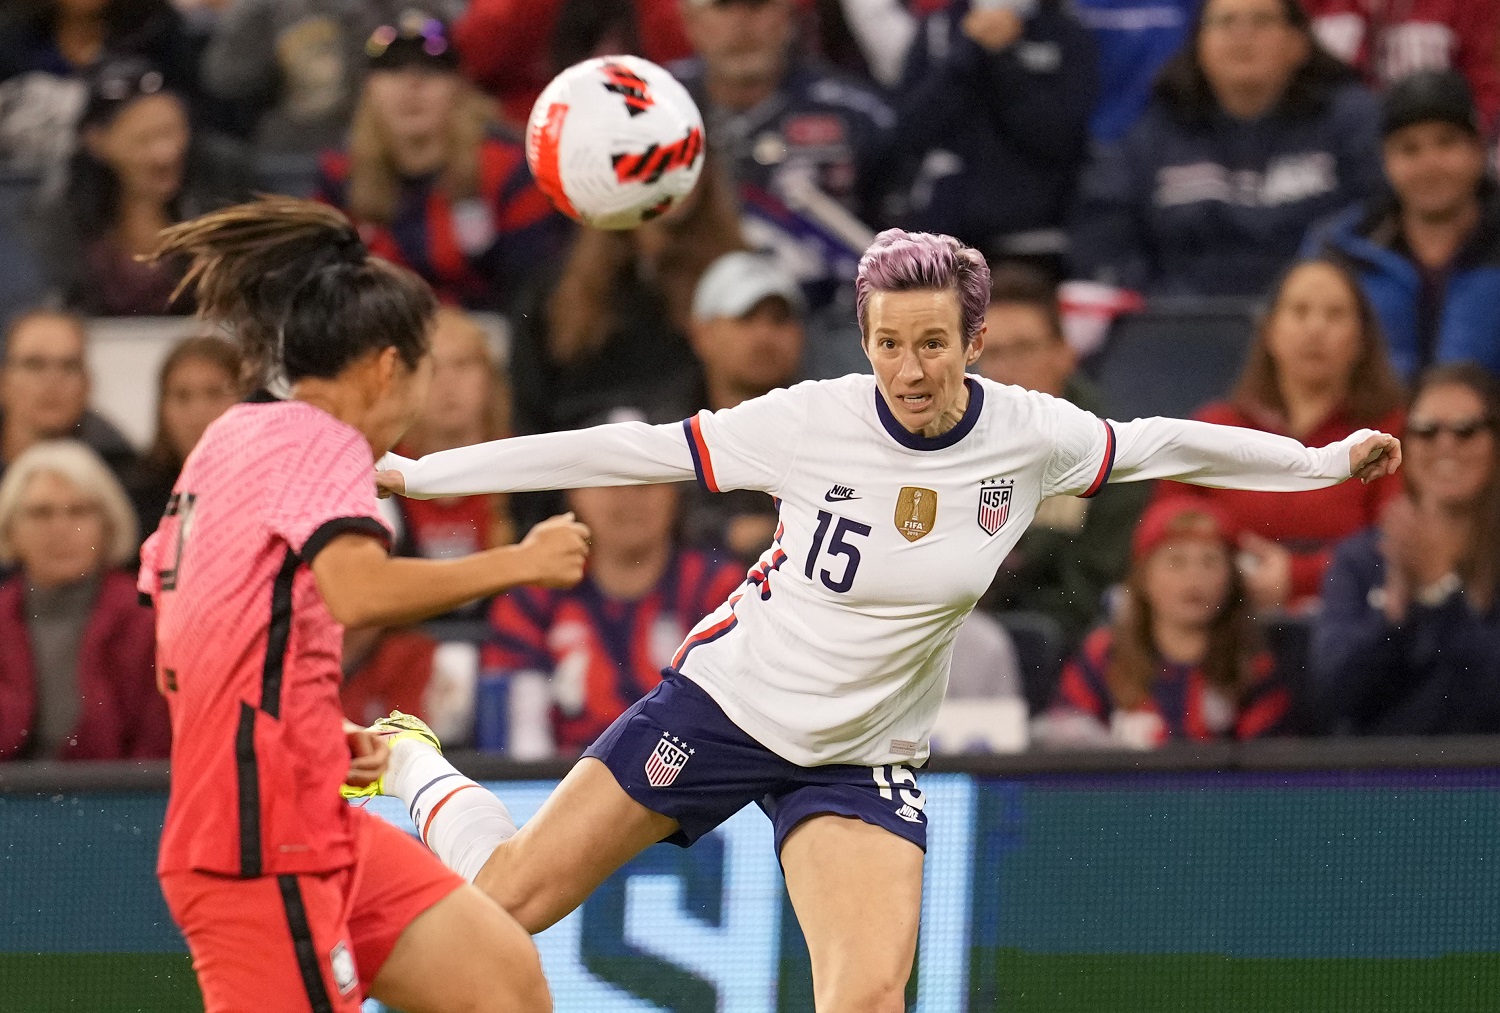 Megan Rapinoe of the USWNT heads a ball during a game against the Korea Republic on Oct. 21, 2021, in Kansas City, Kansas.